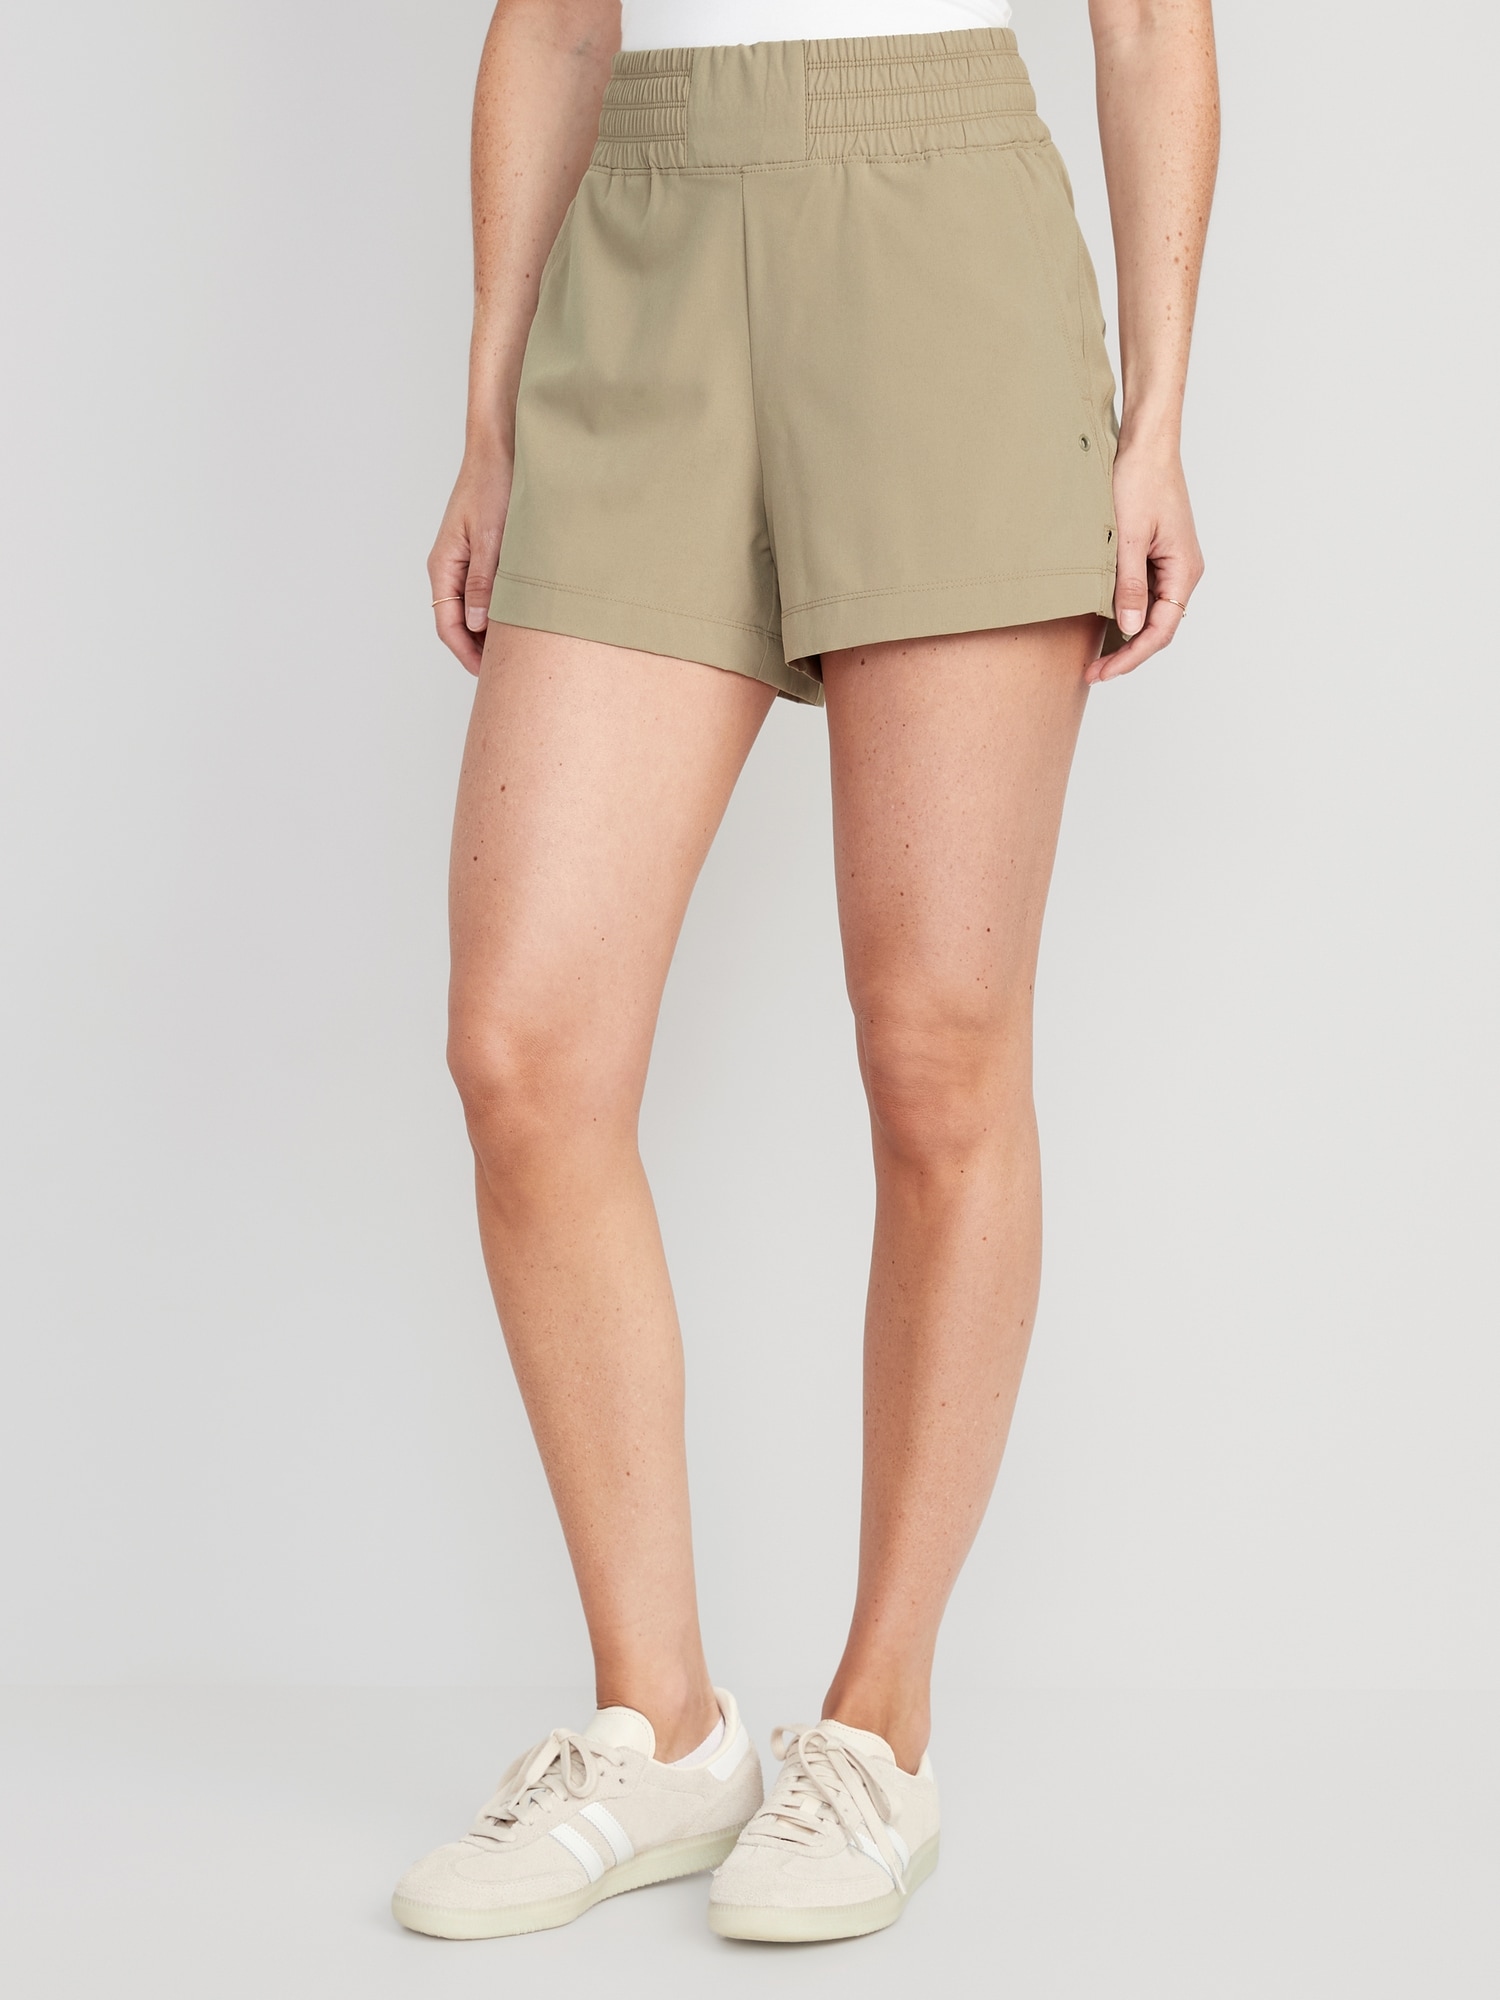 Old Navy - High-Waisted StretchTech Pull-On Shorts for Women - 4